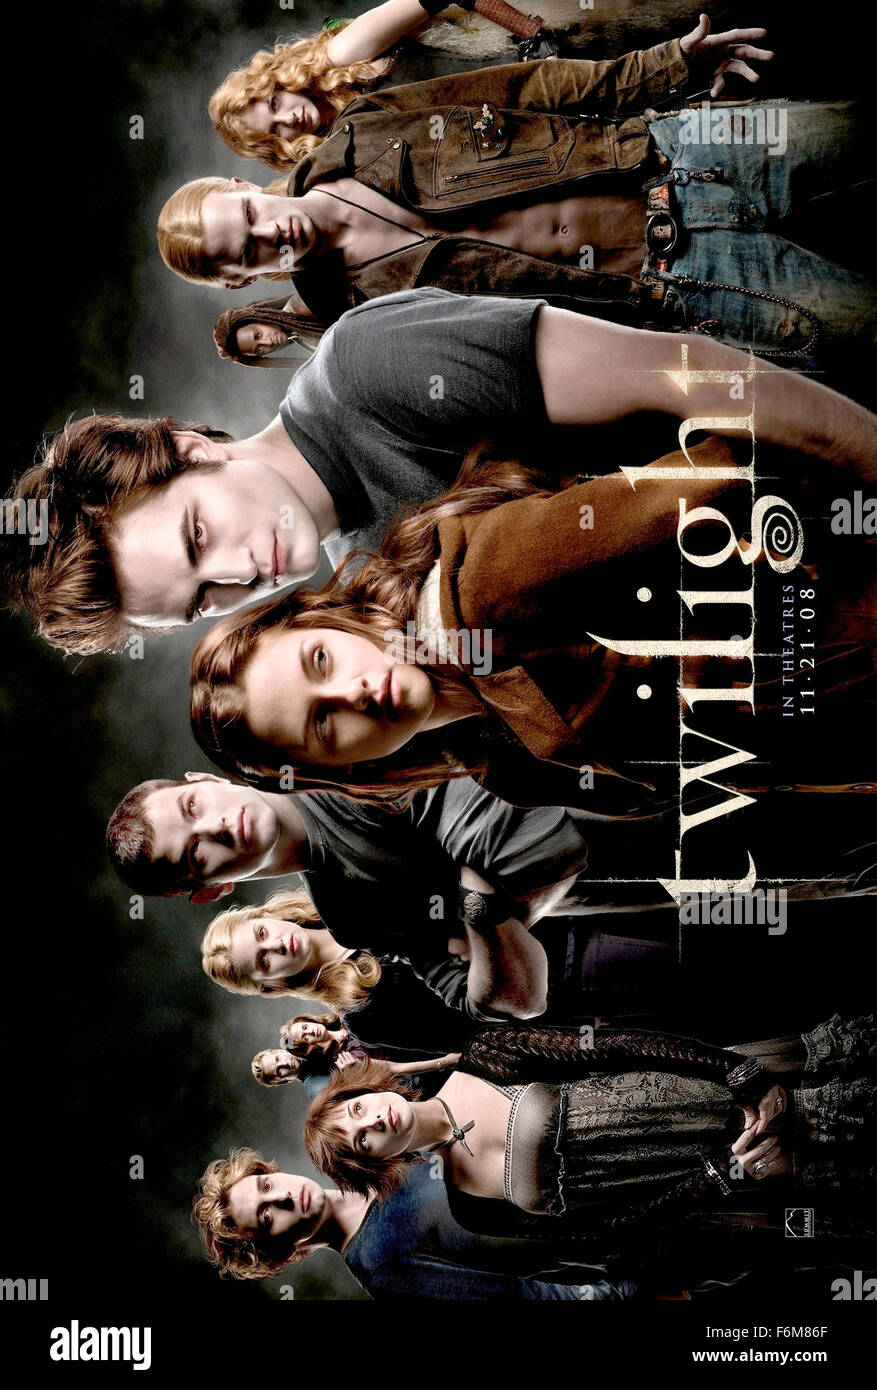 RELEASE DATE: November 21, 2008. MOVIE TITLE: Twilight. STUDIO: Summit  Entertainment. PLOT: Bella Swan is a clumsy, kind hearted teenager with a  knack for getting into trouble. Edward Cullen is an intelligent,